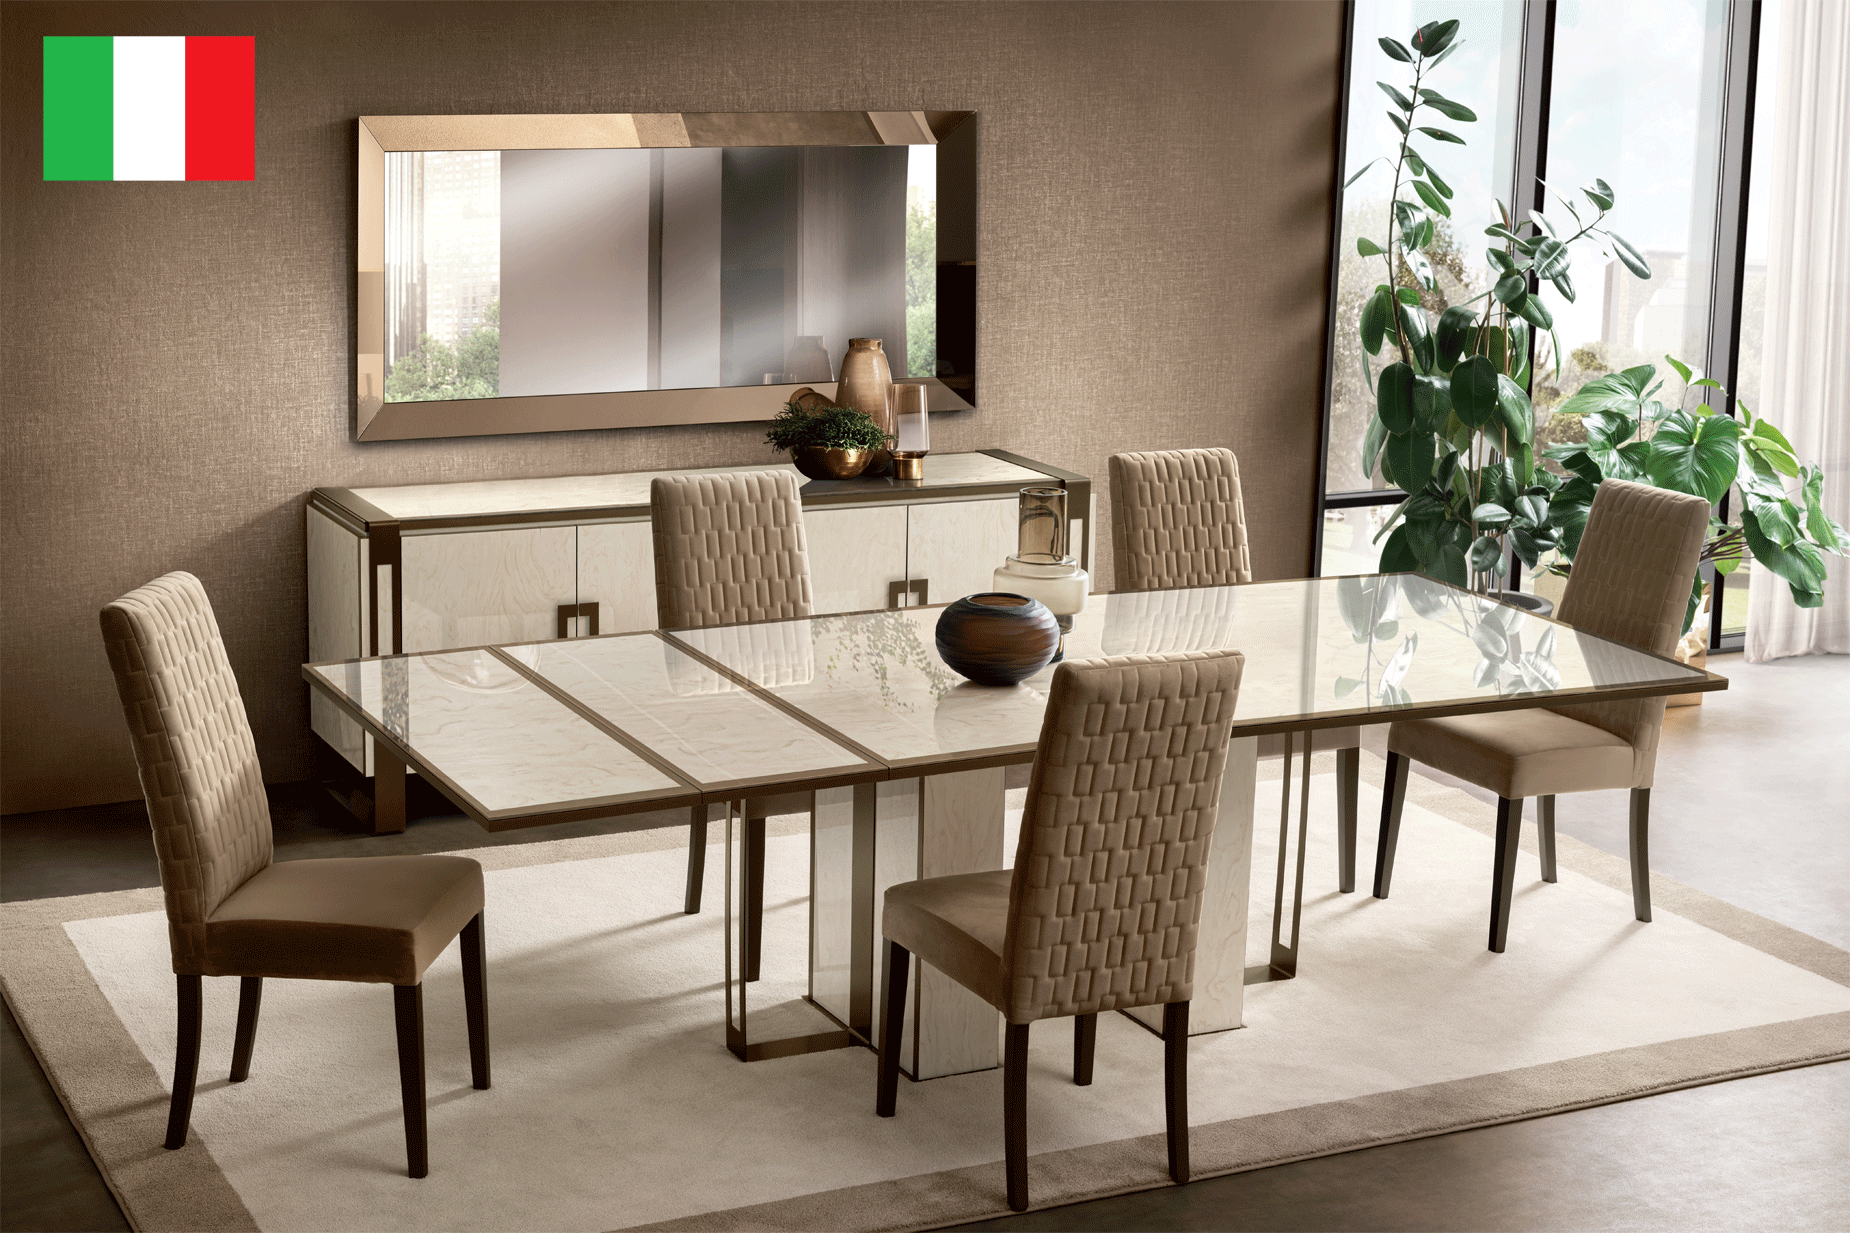 Wallunits Hallway Console tables and Mirrors Poesia Dining Room